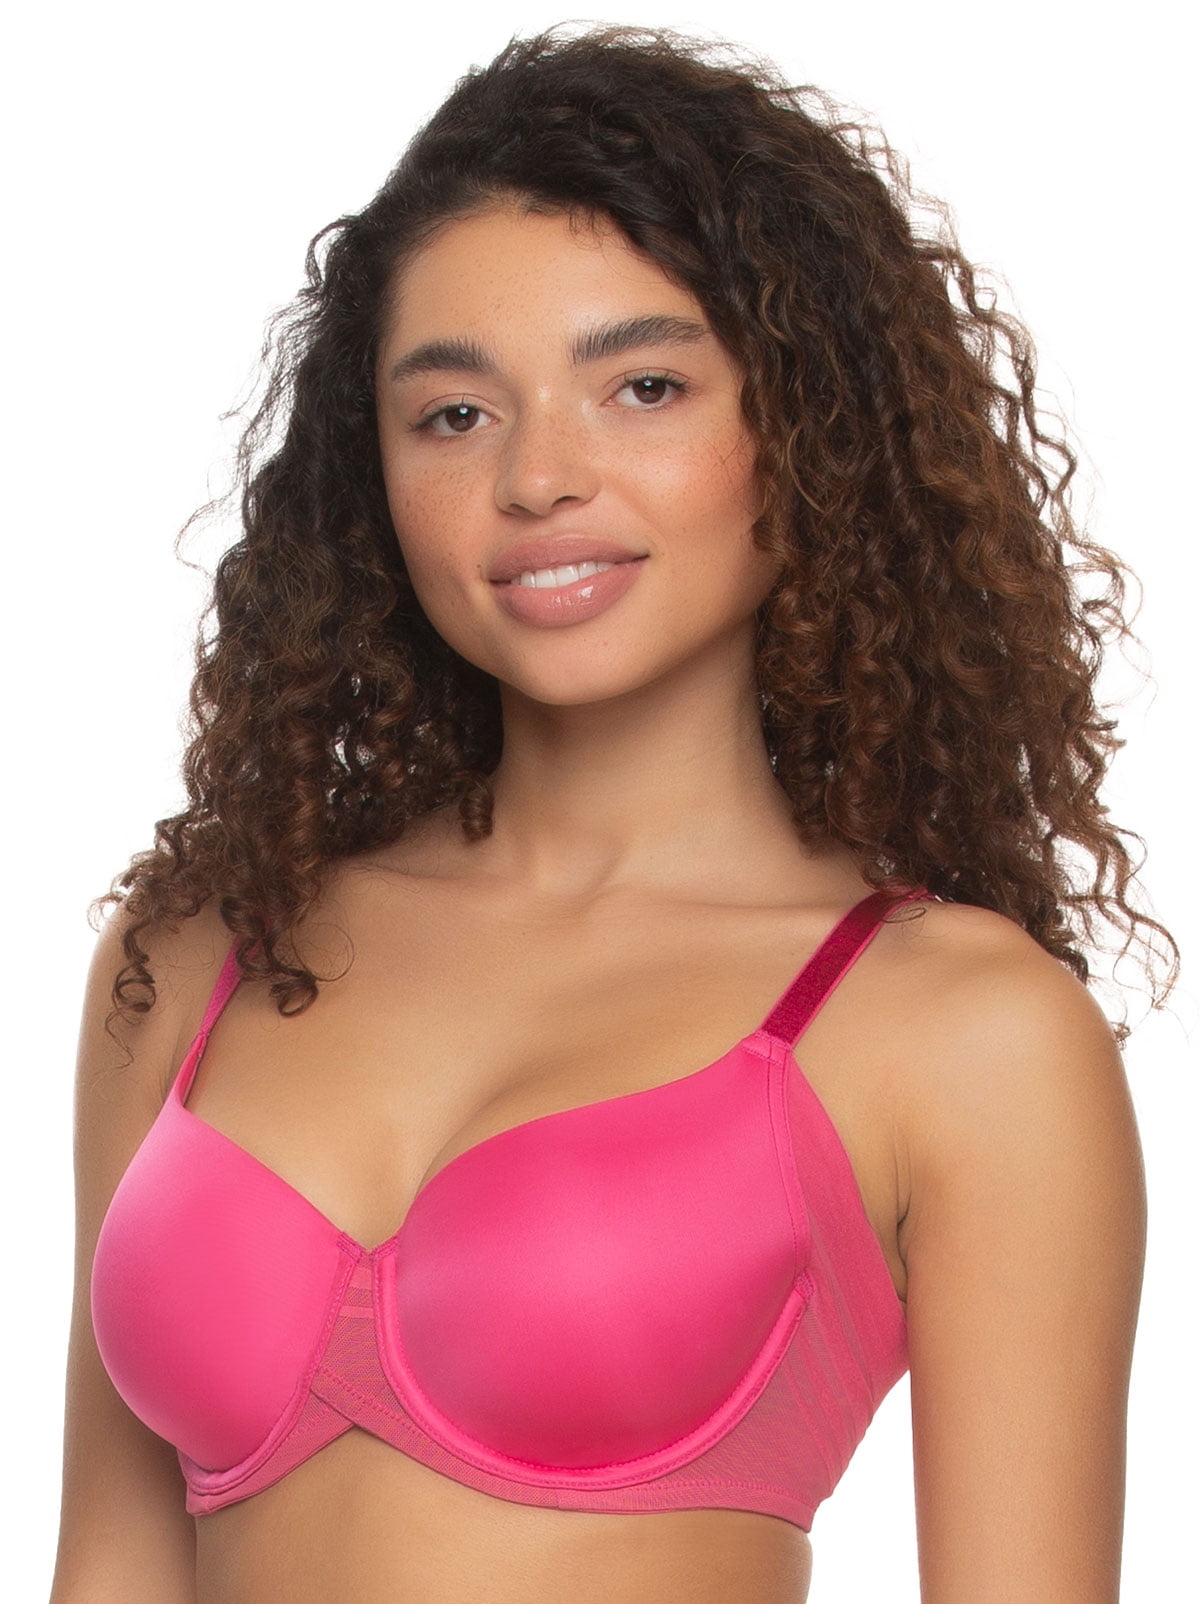 Paramour by Felina  Marvelous Side Smoothing T-Shirt Bra 2-Pack (Black  Warm Neutral, 38DDD) 